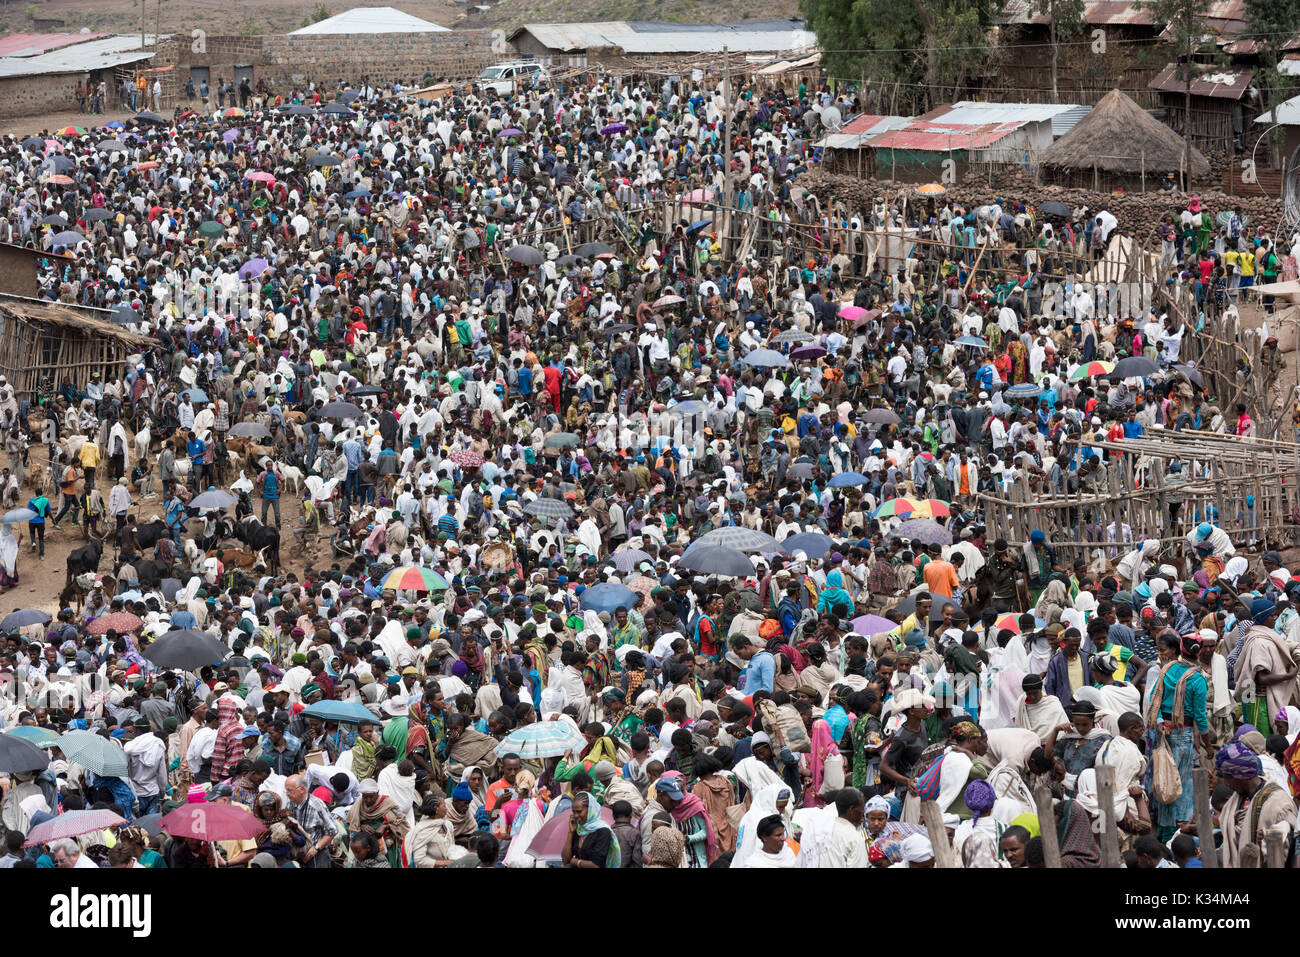 Crowds at the outdoor market held on Ethiopian Orthodox Easter Saturday to buy food to celebrate the end of the Lent period of fasting, Lalibela, Ethiopia Stock Photo